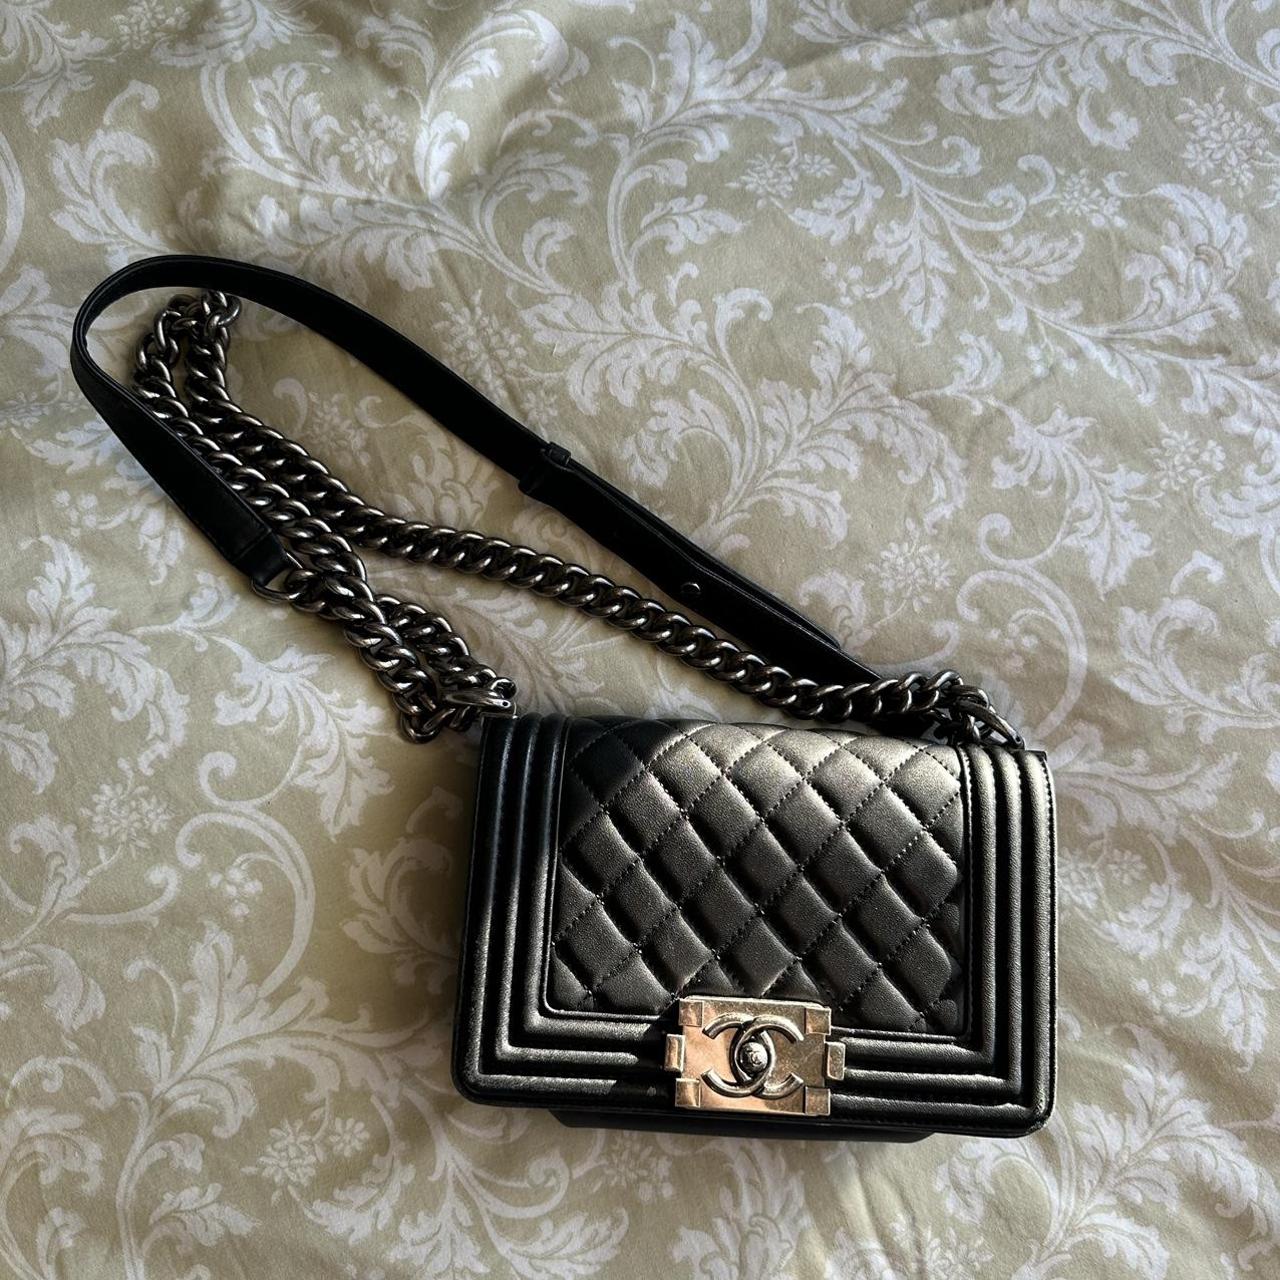 Authentic Chanel XXL Airline Travel Bag. With - Depop